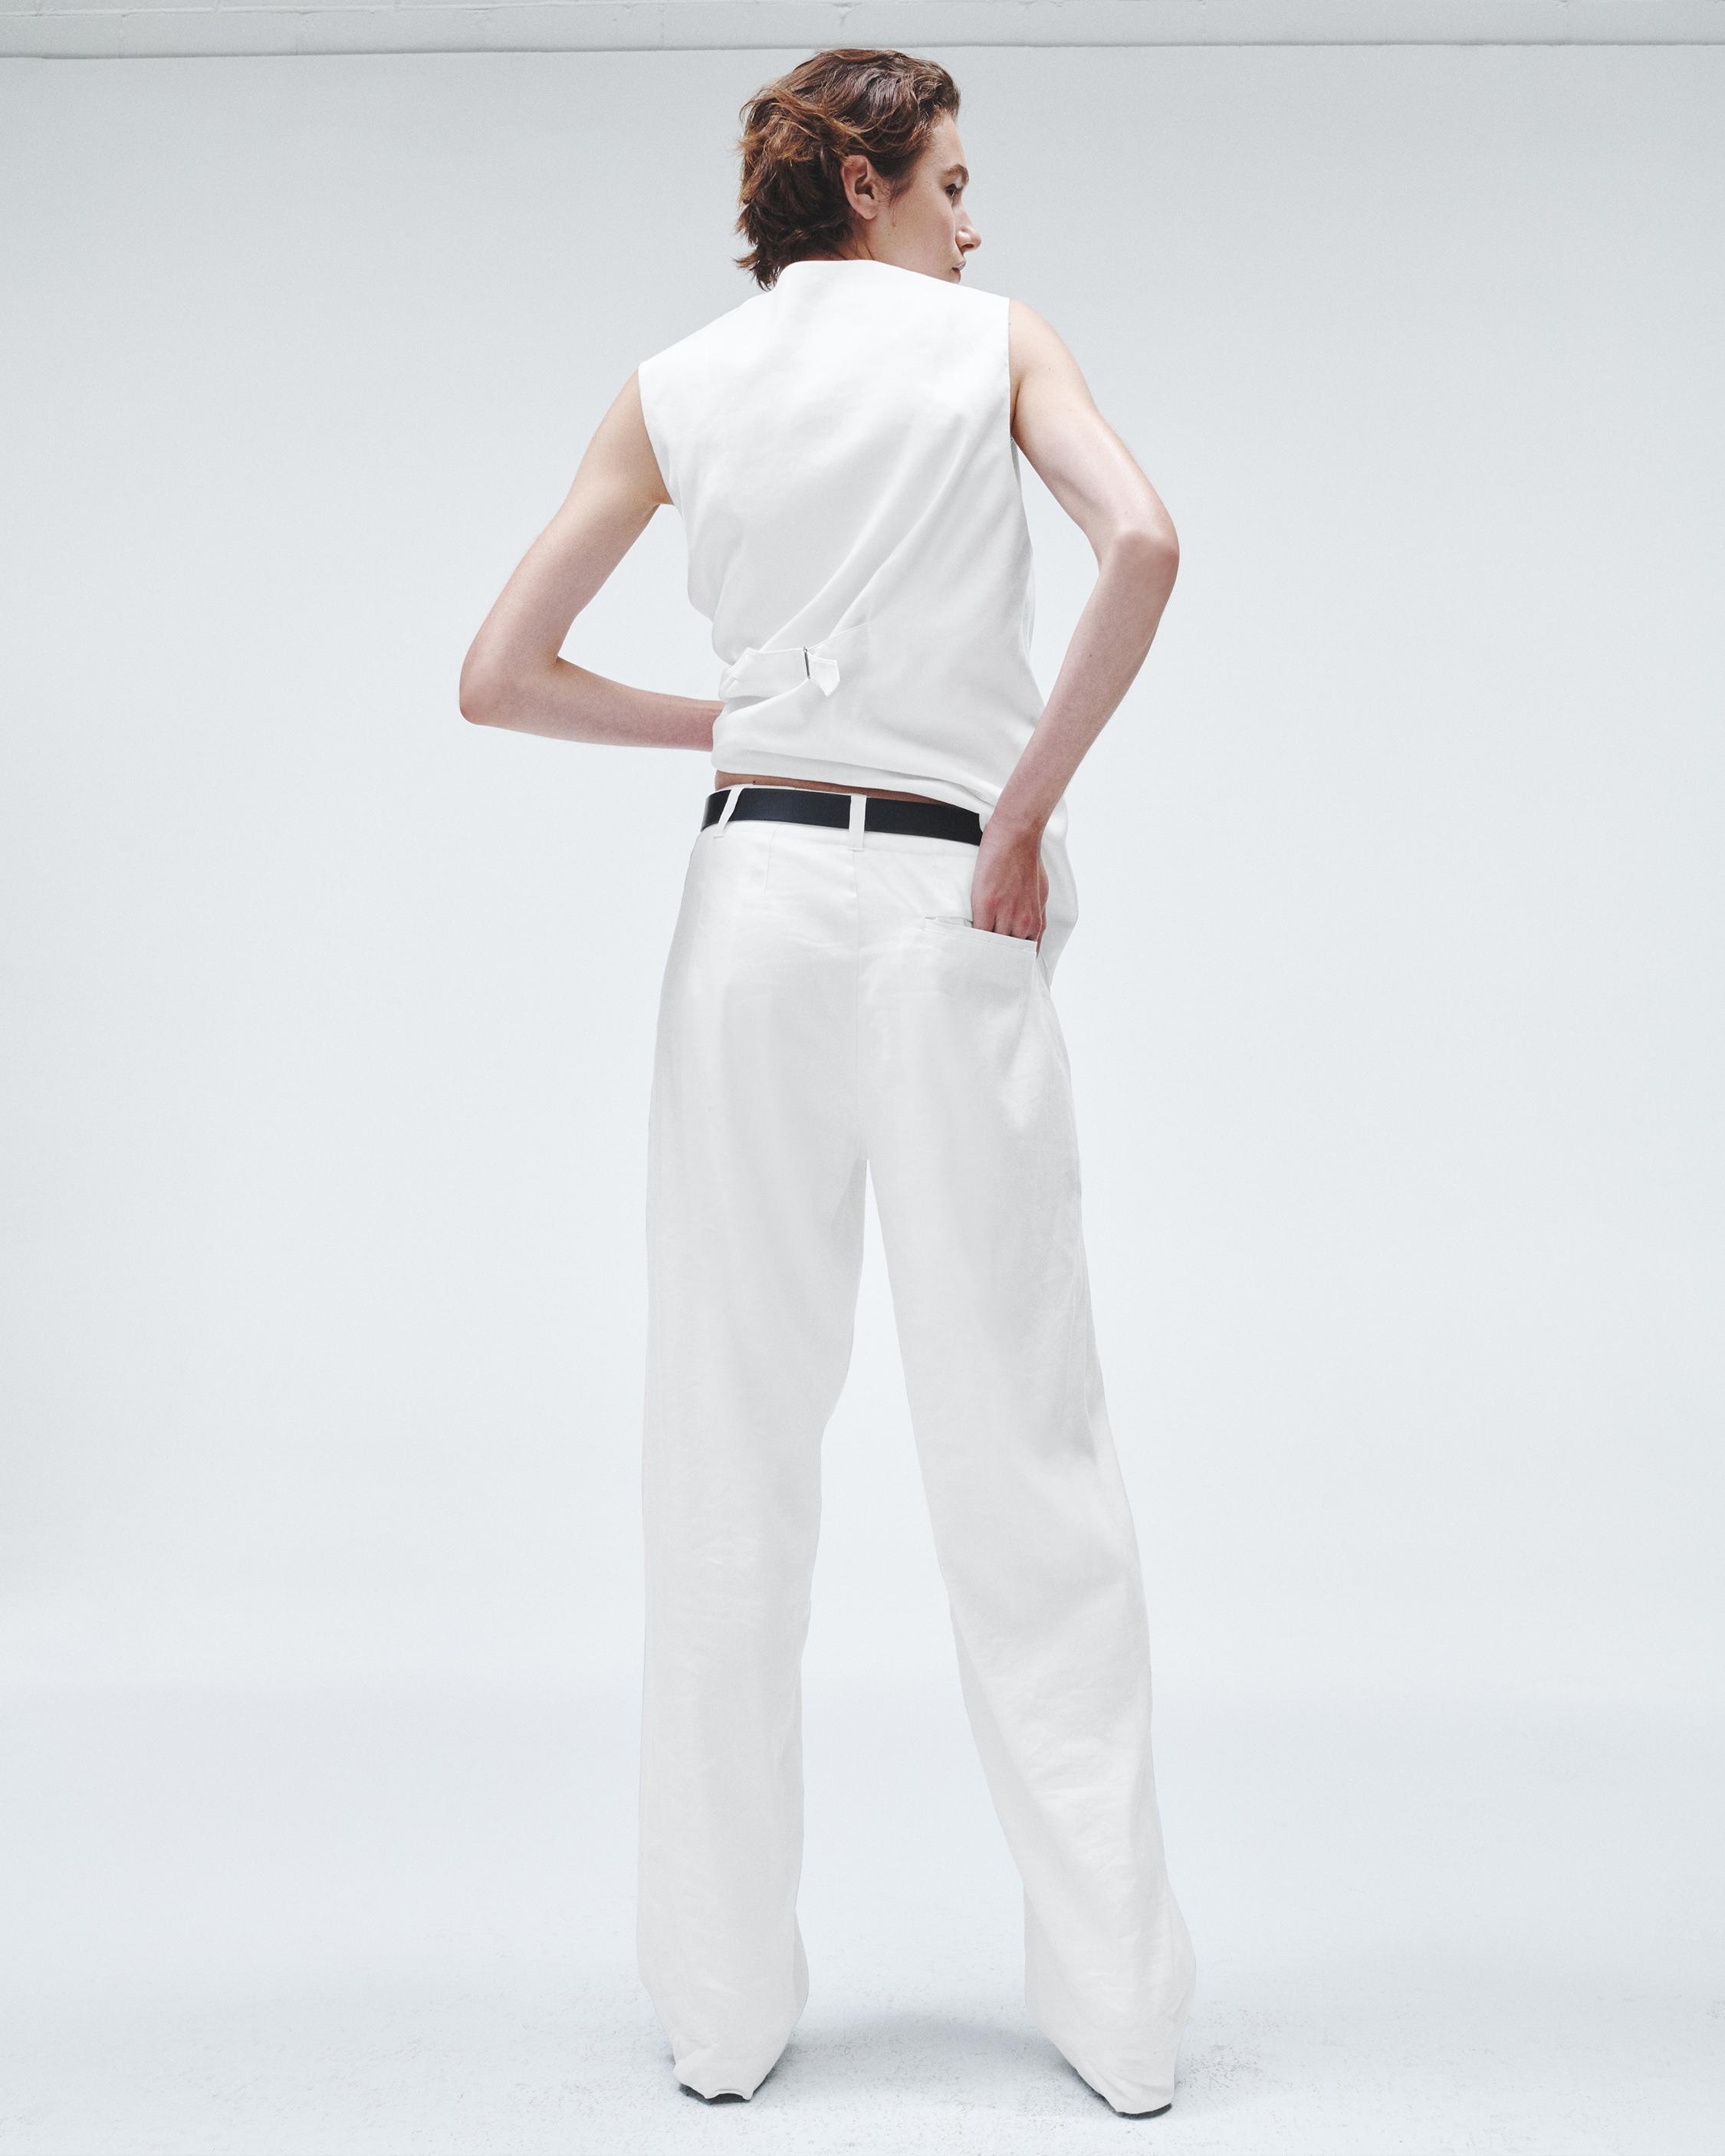 Donovan Linen Pant
Relaxed Fit - 4